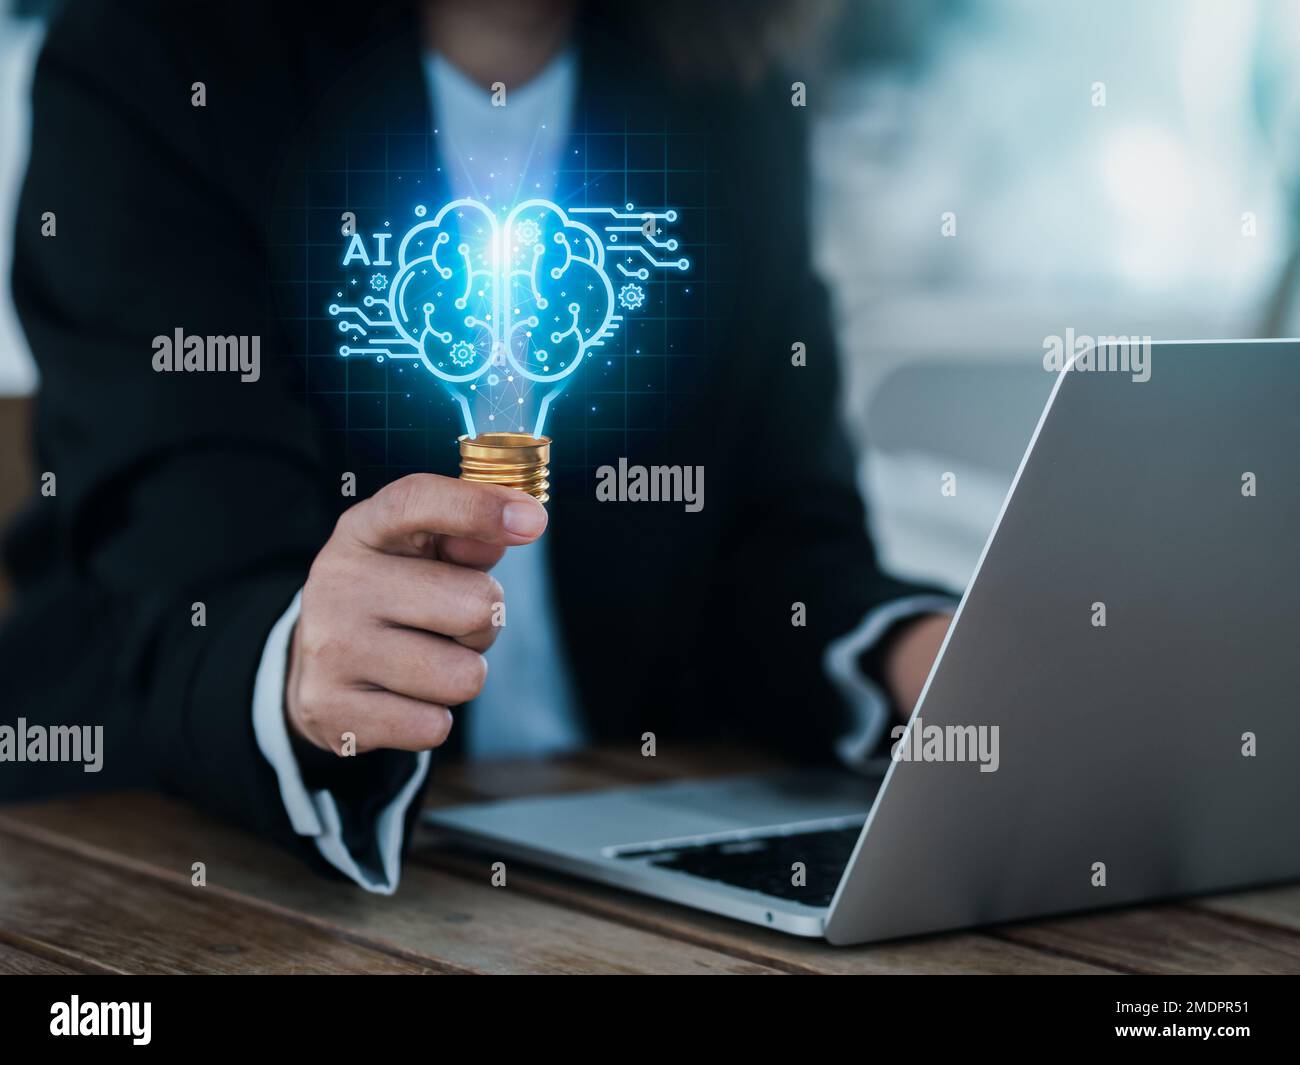 Artificial intelligence technology concept. Glow digital light bulb graphics with AI brain system inside, hold by business person. Creative innovation Stock Photo